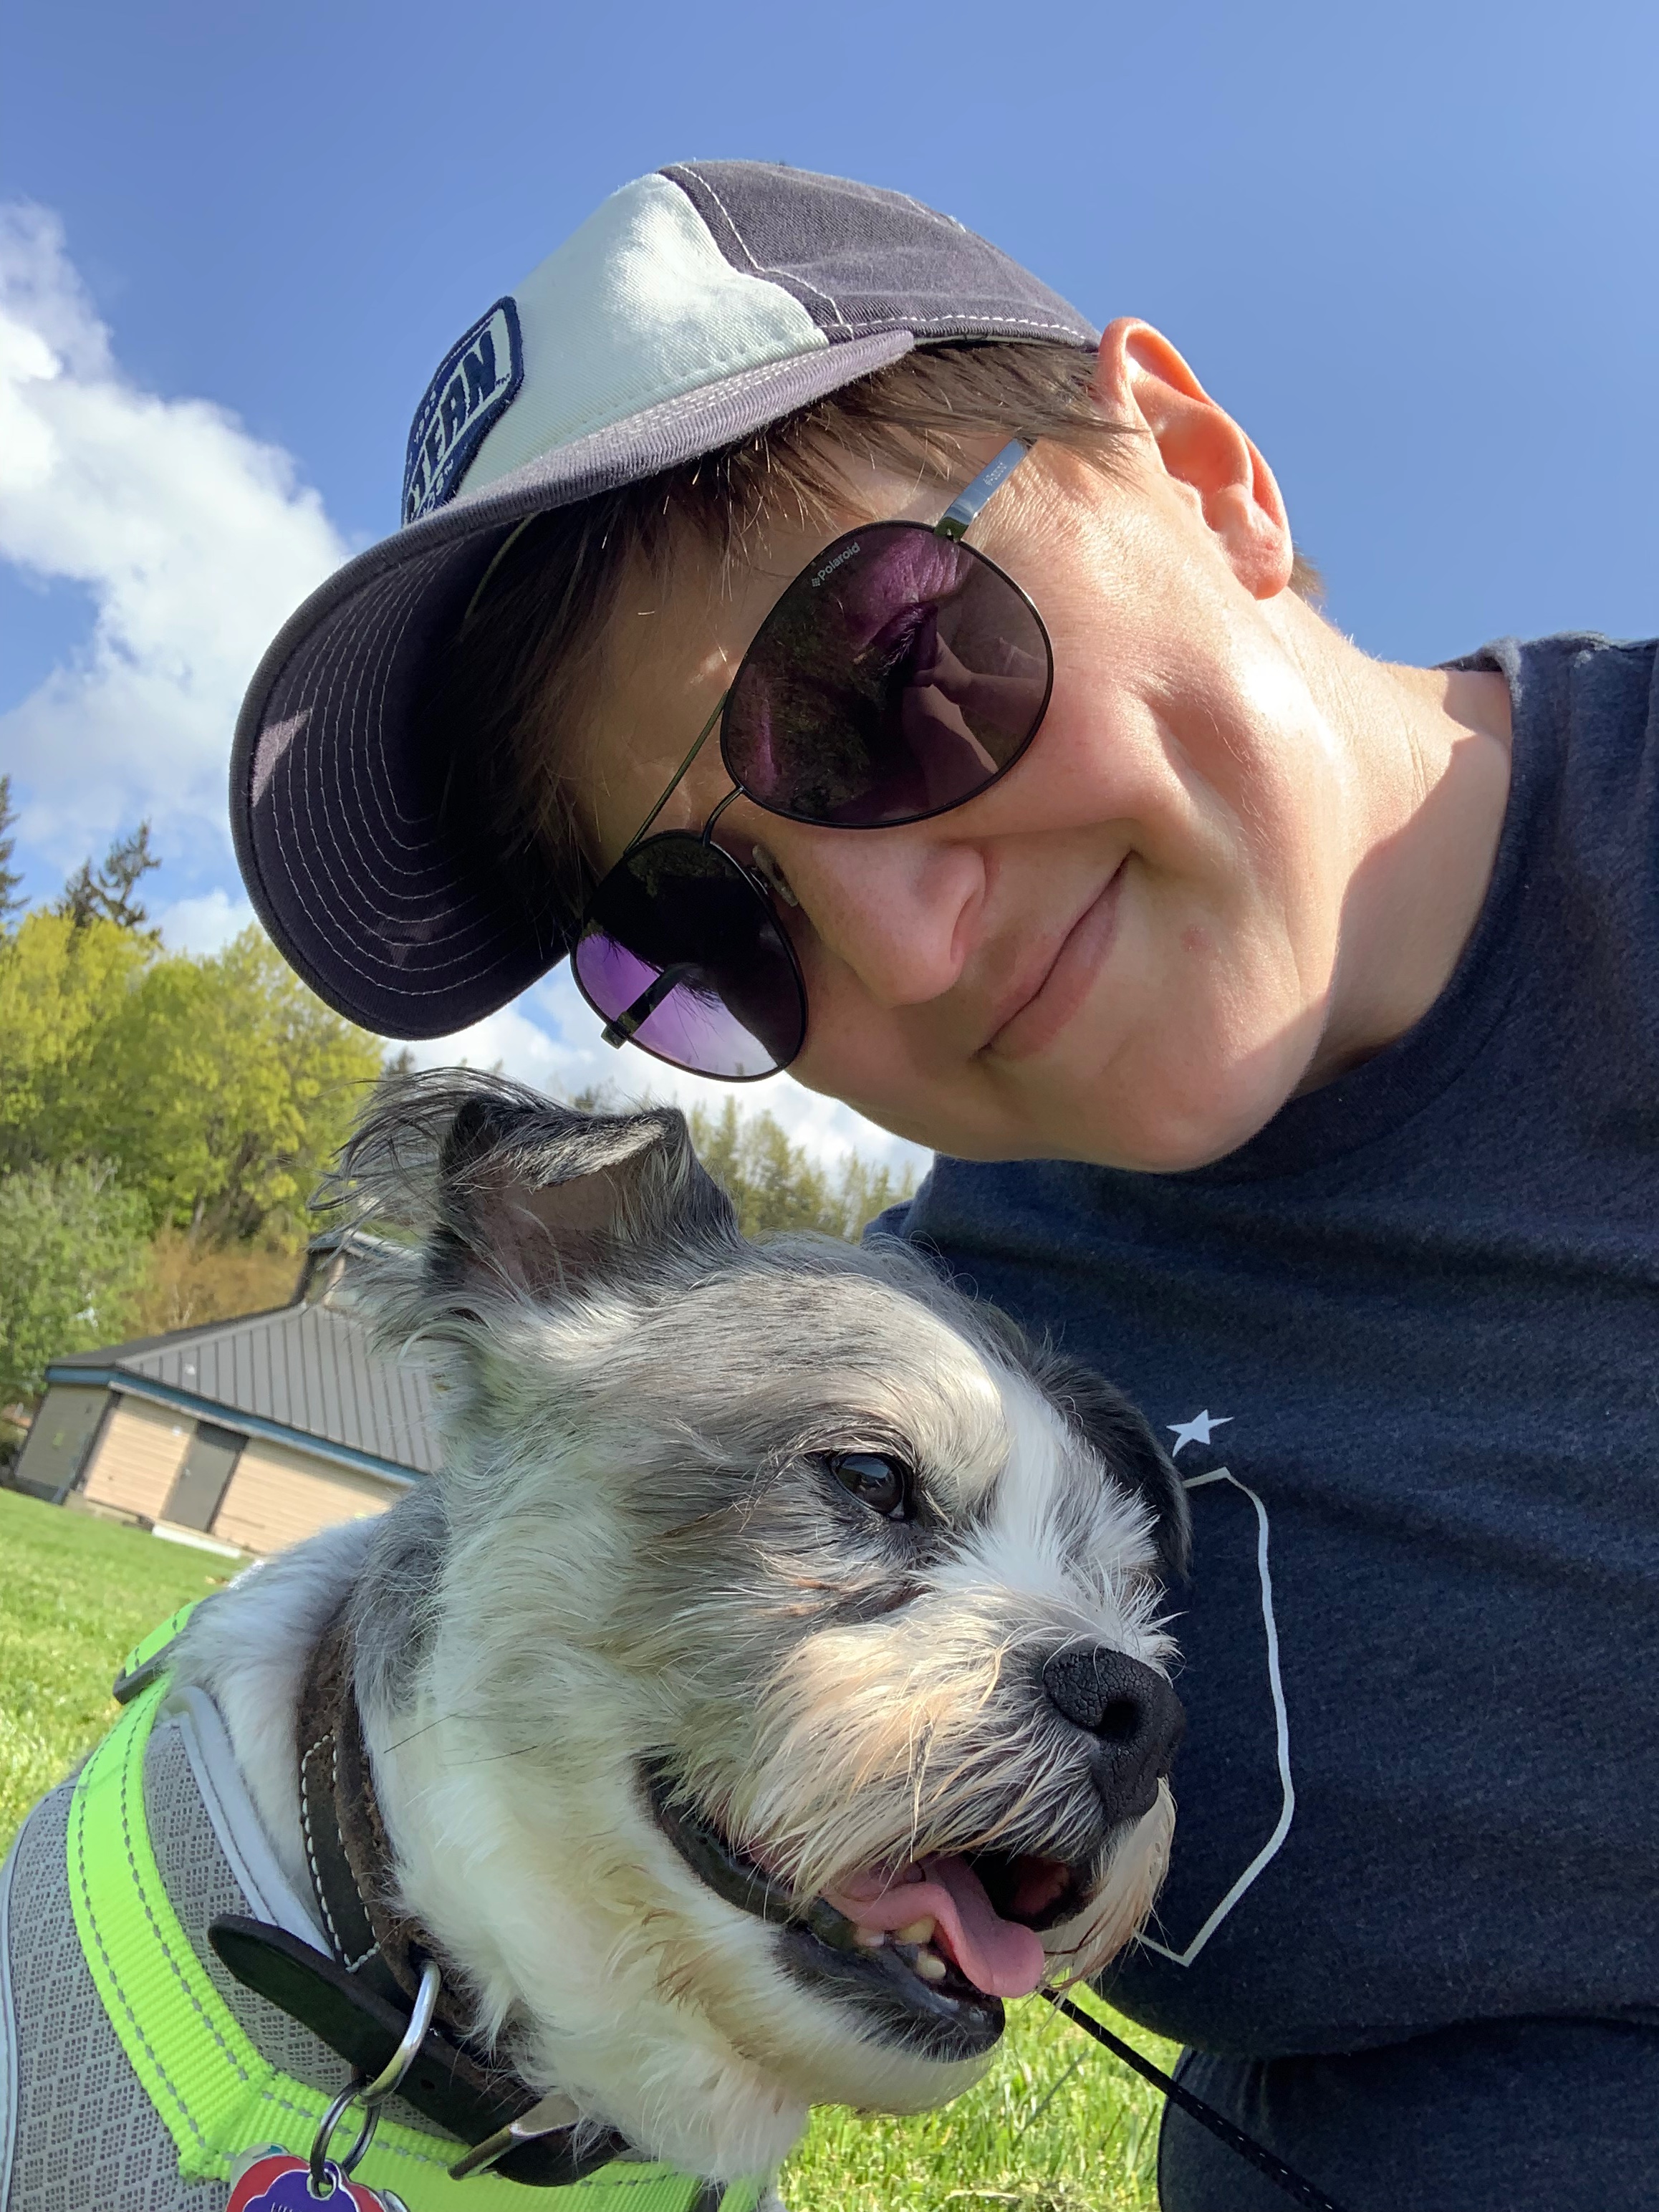 WWU outstanding graduate student Kristina Kelehan with sunglasses and a ball cap on. There's a white and gray dog in the lower left corner named Riley